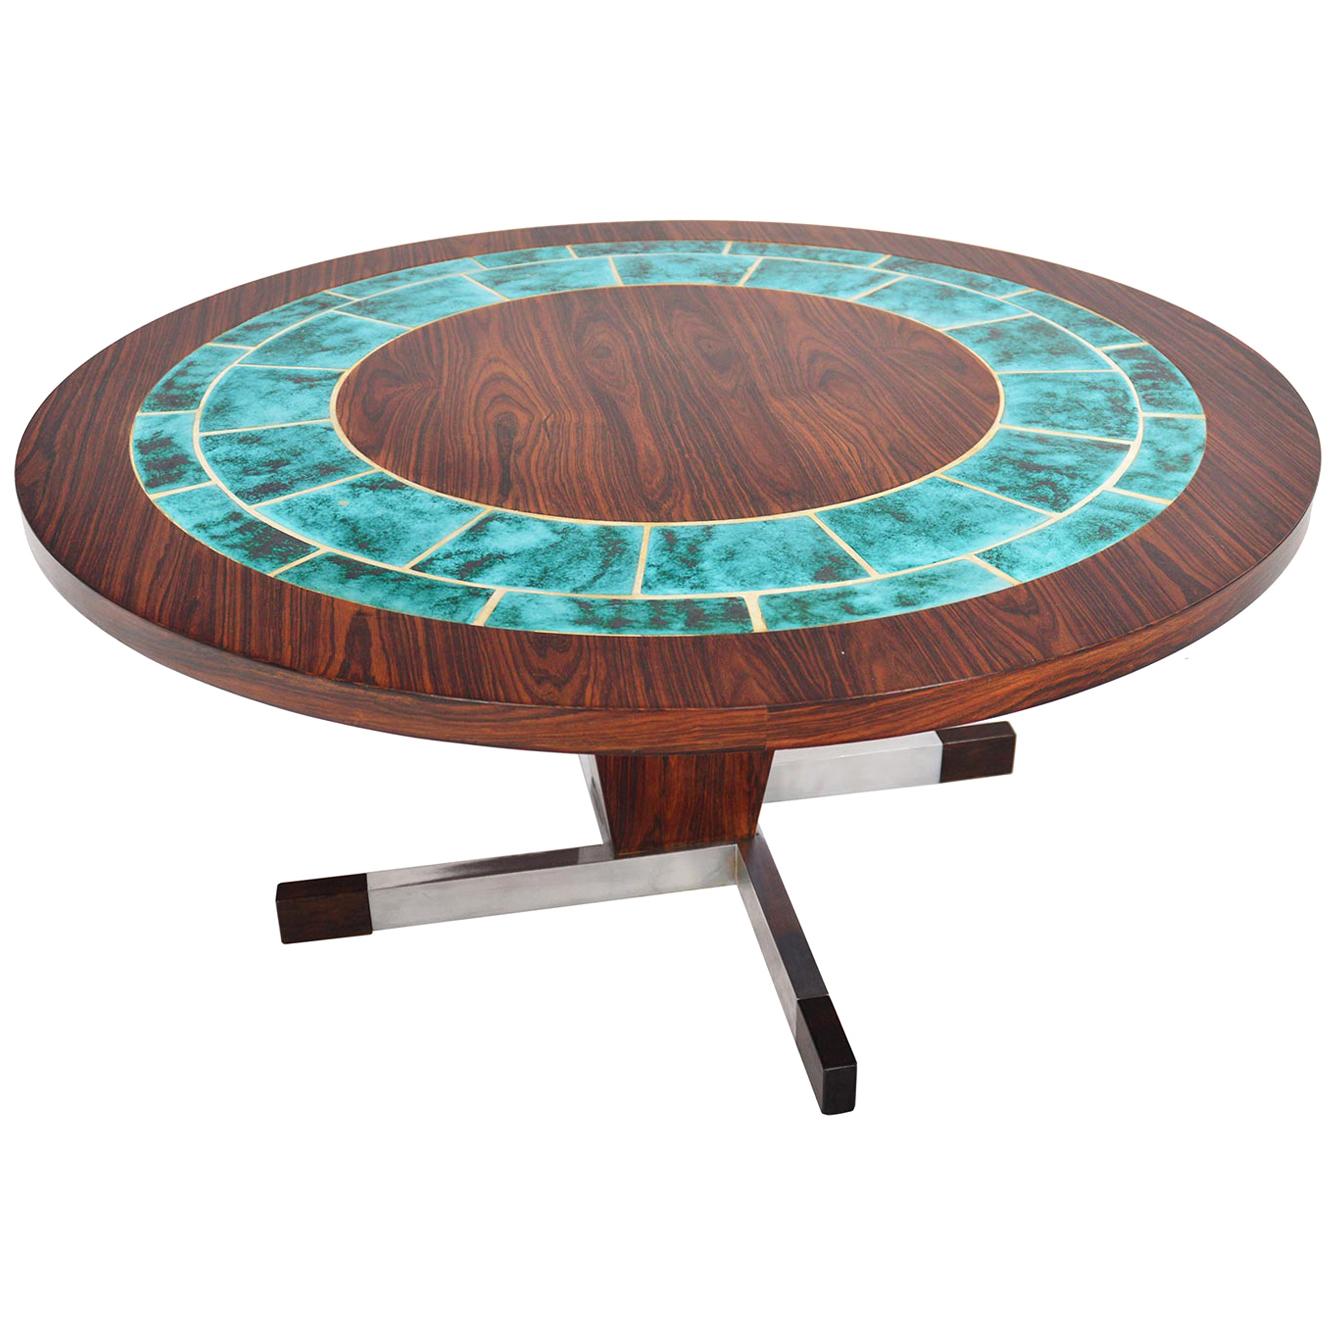 Danish Modern Round Rosewood and Turquoise Tile Coffee Table